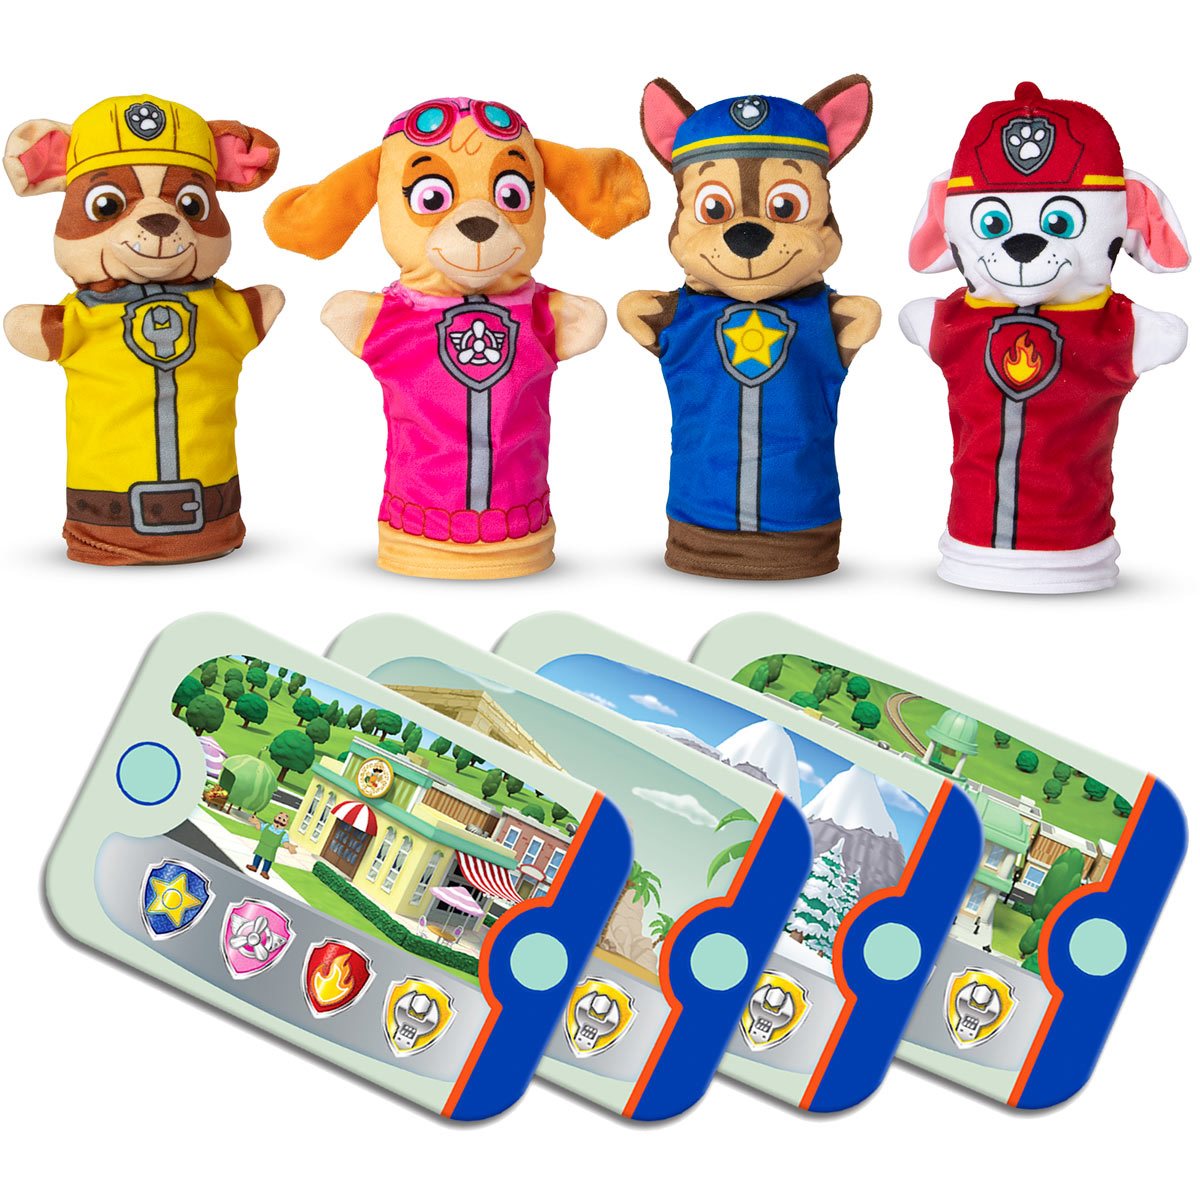 PAW Patrol Hand Puppets Set of 4 - Entertainment Earth